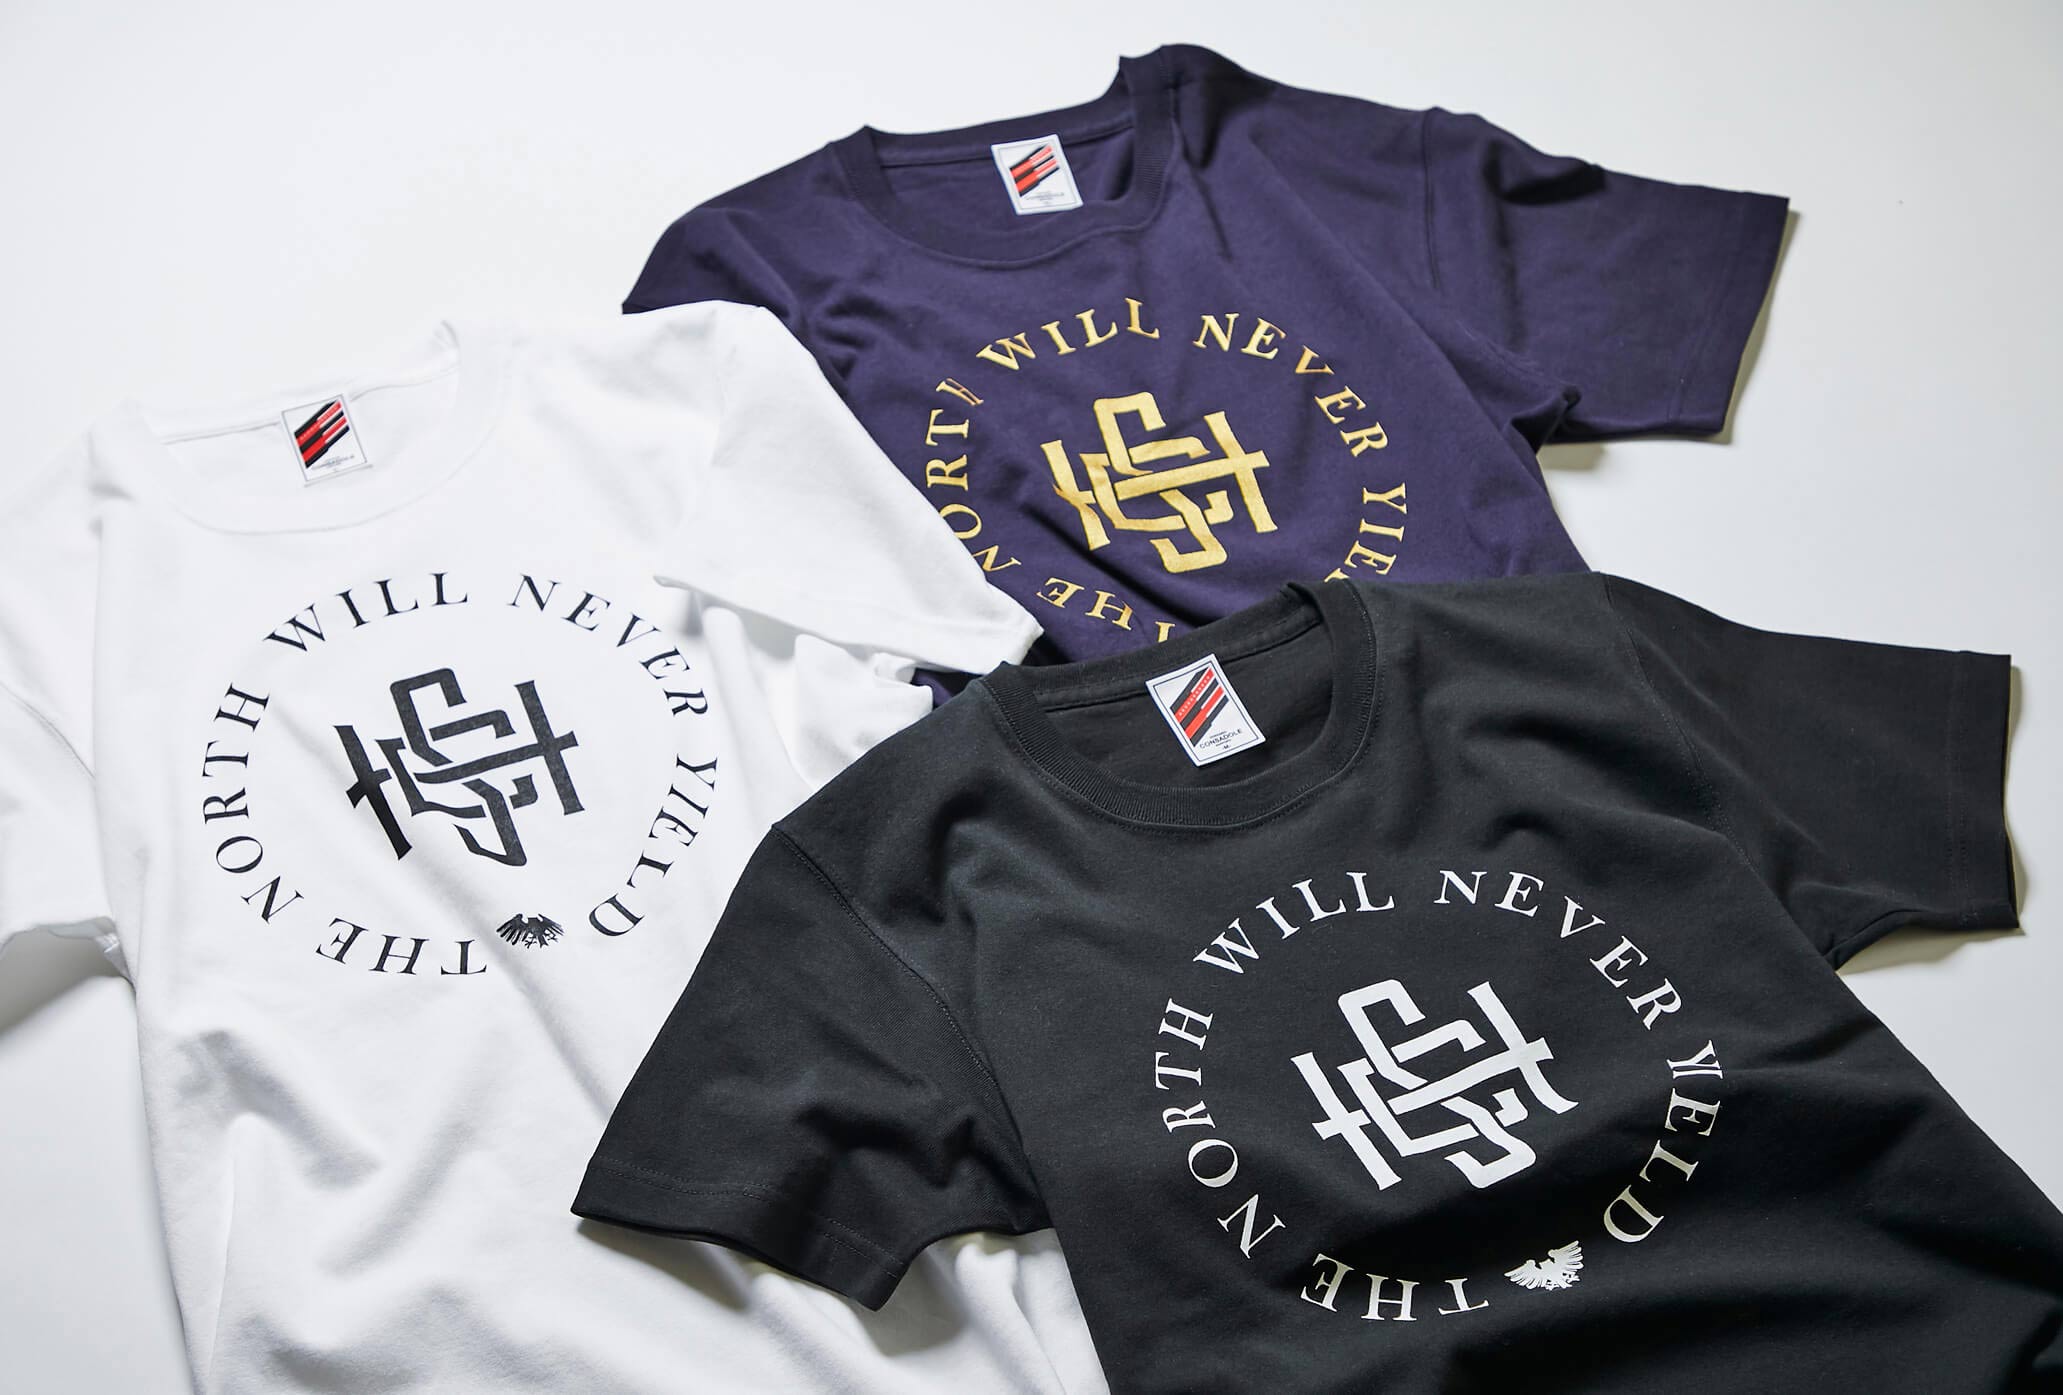 NEVER YIELD T shirts